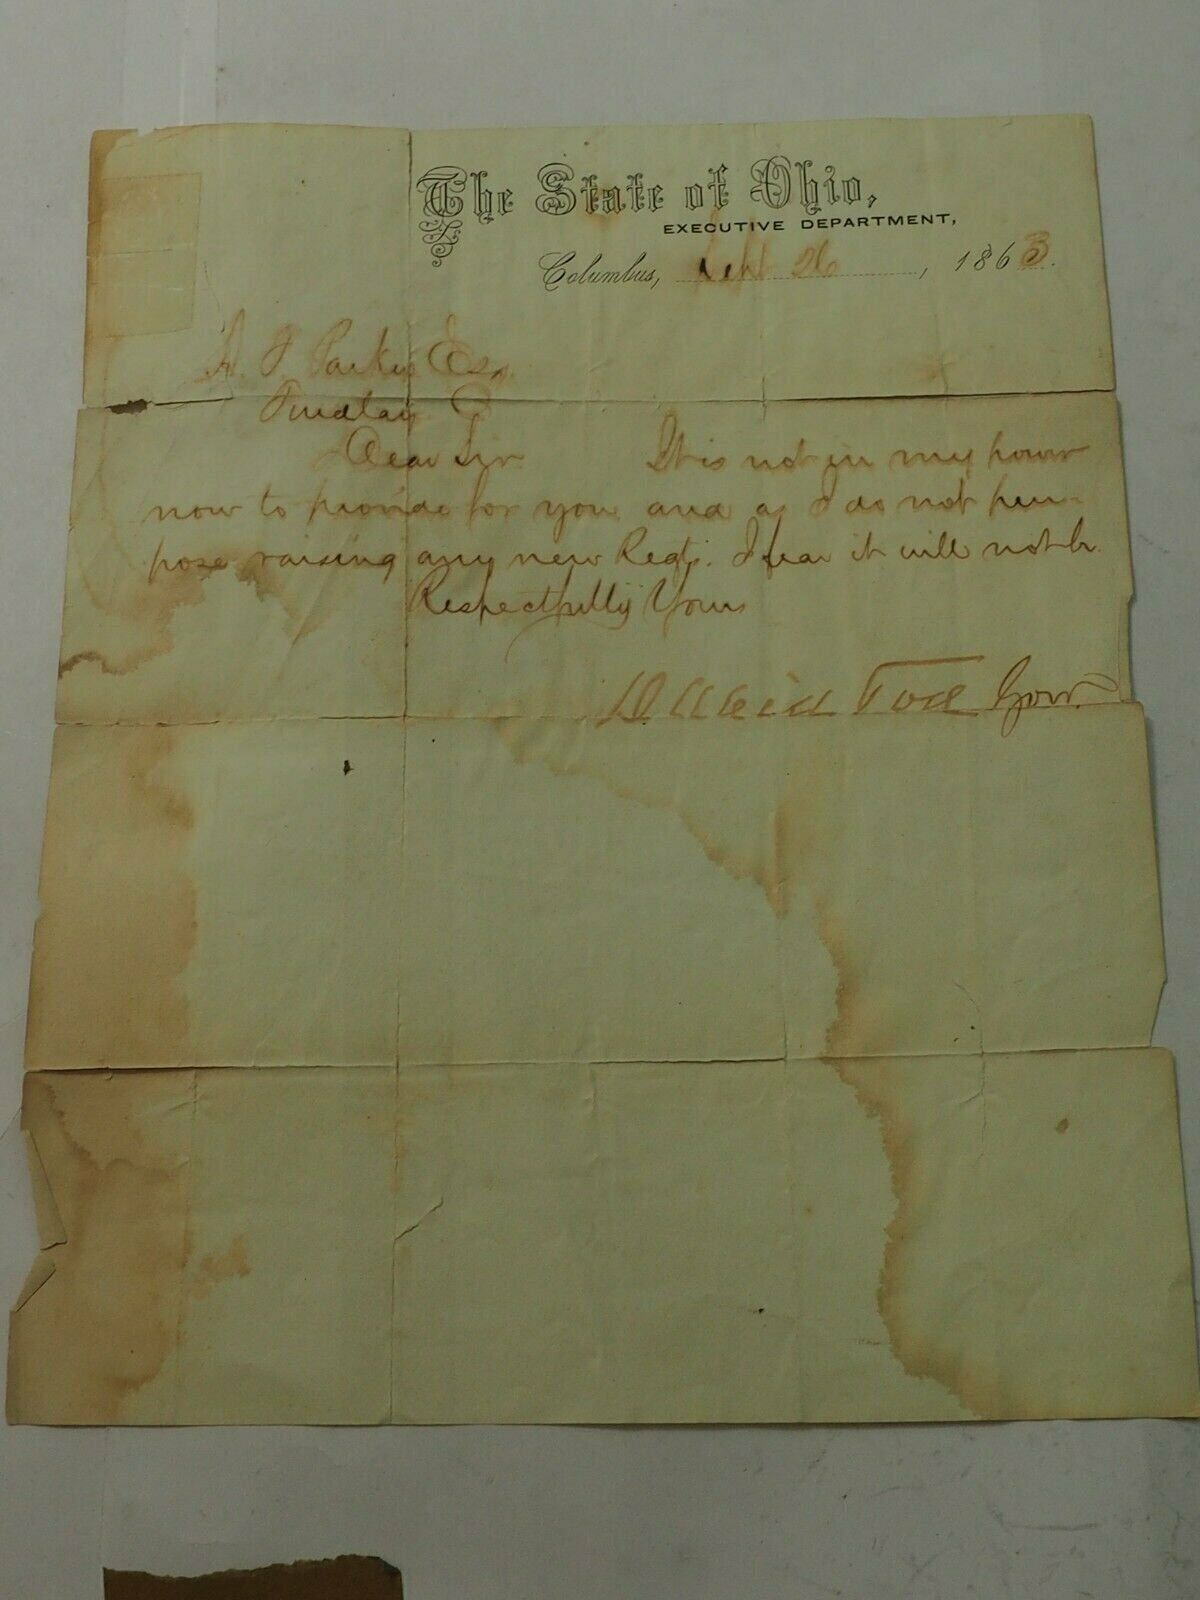 1863 Letter The State Of Ohio Executive Department to A..J.Parker Civil War era